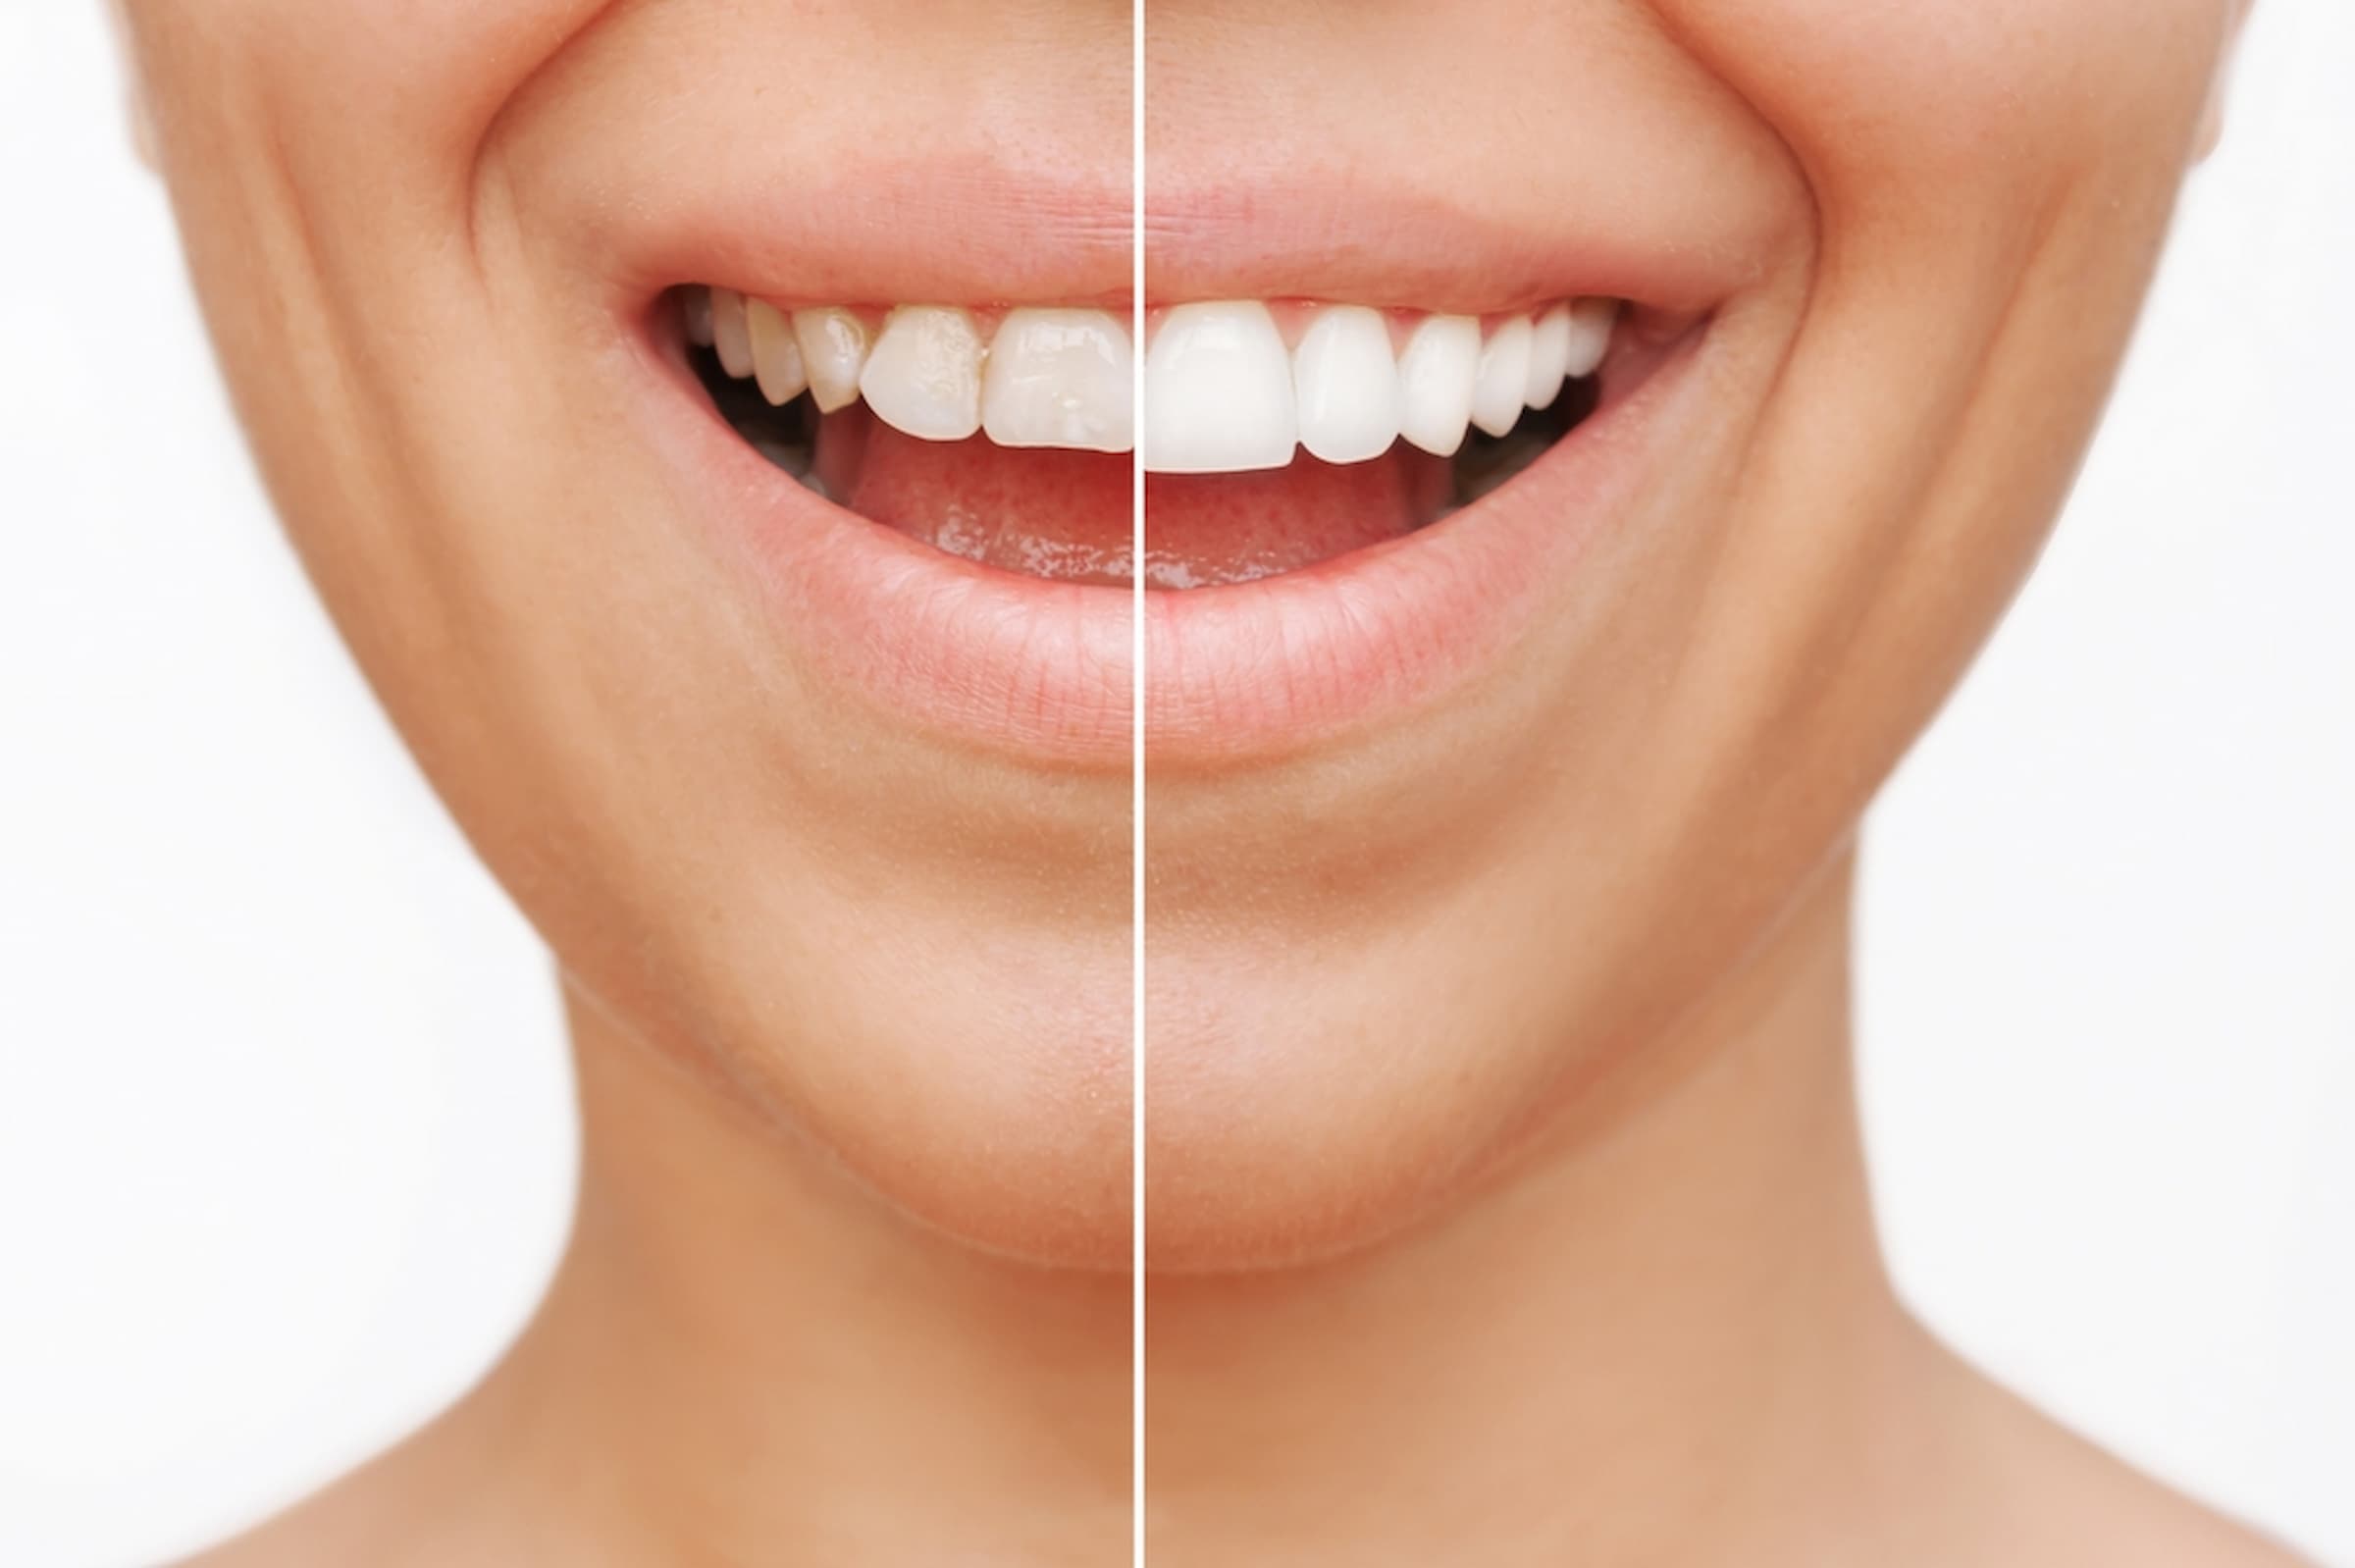 Get your dental veneers in Bangkok and improve your smile overnight.